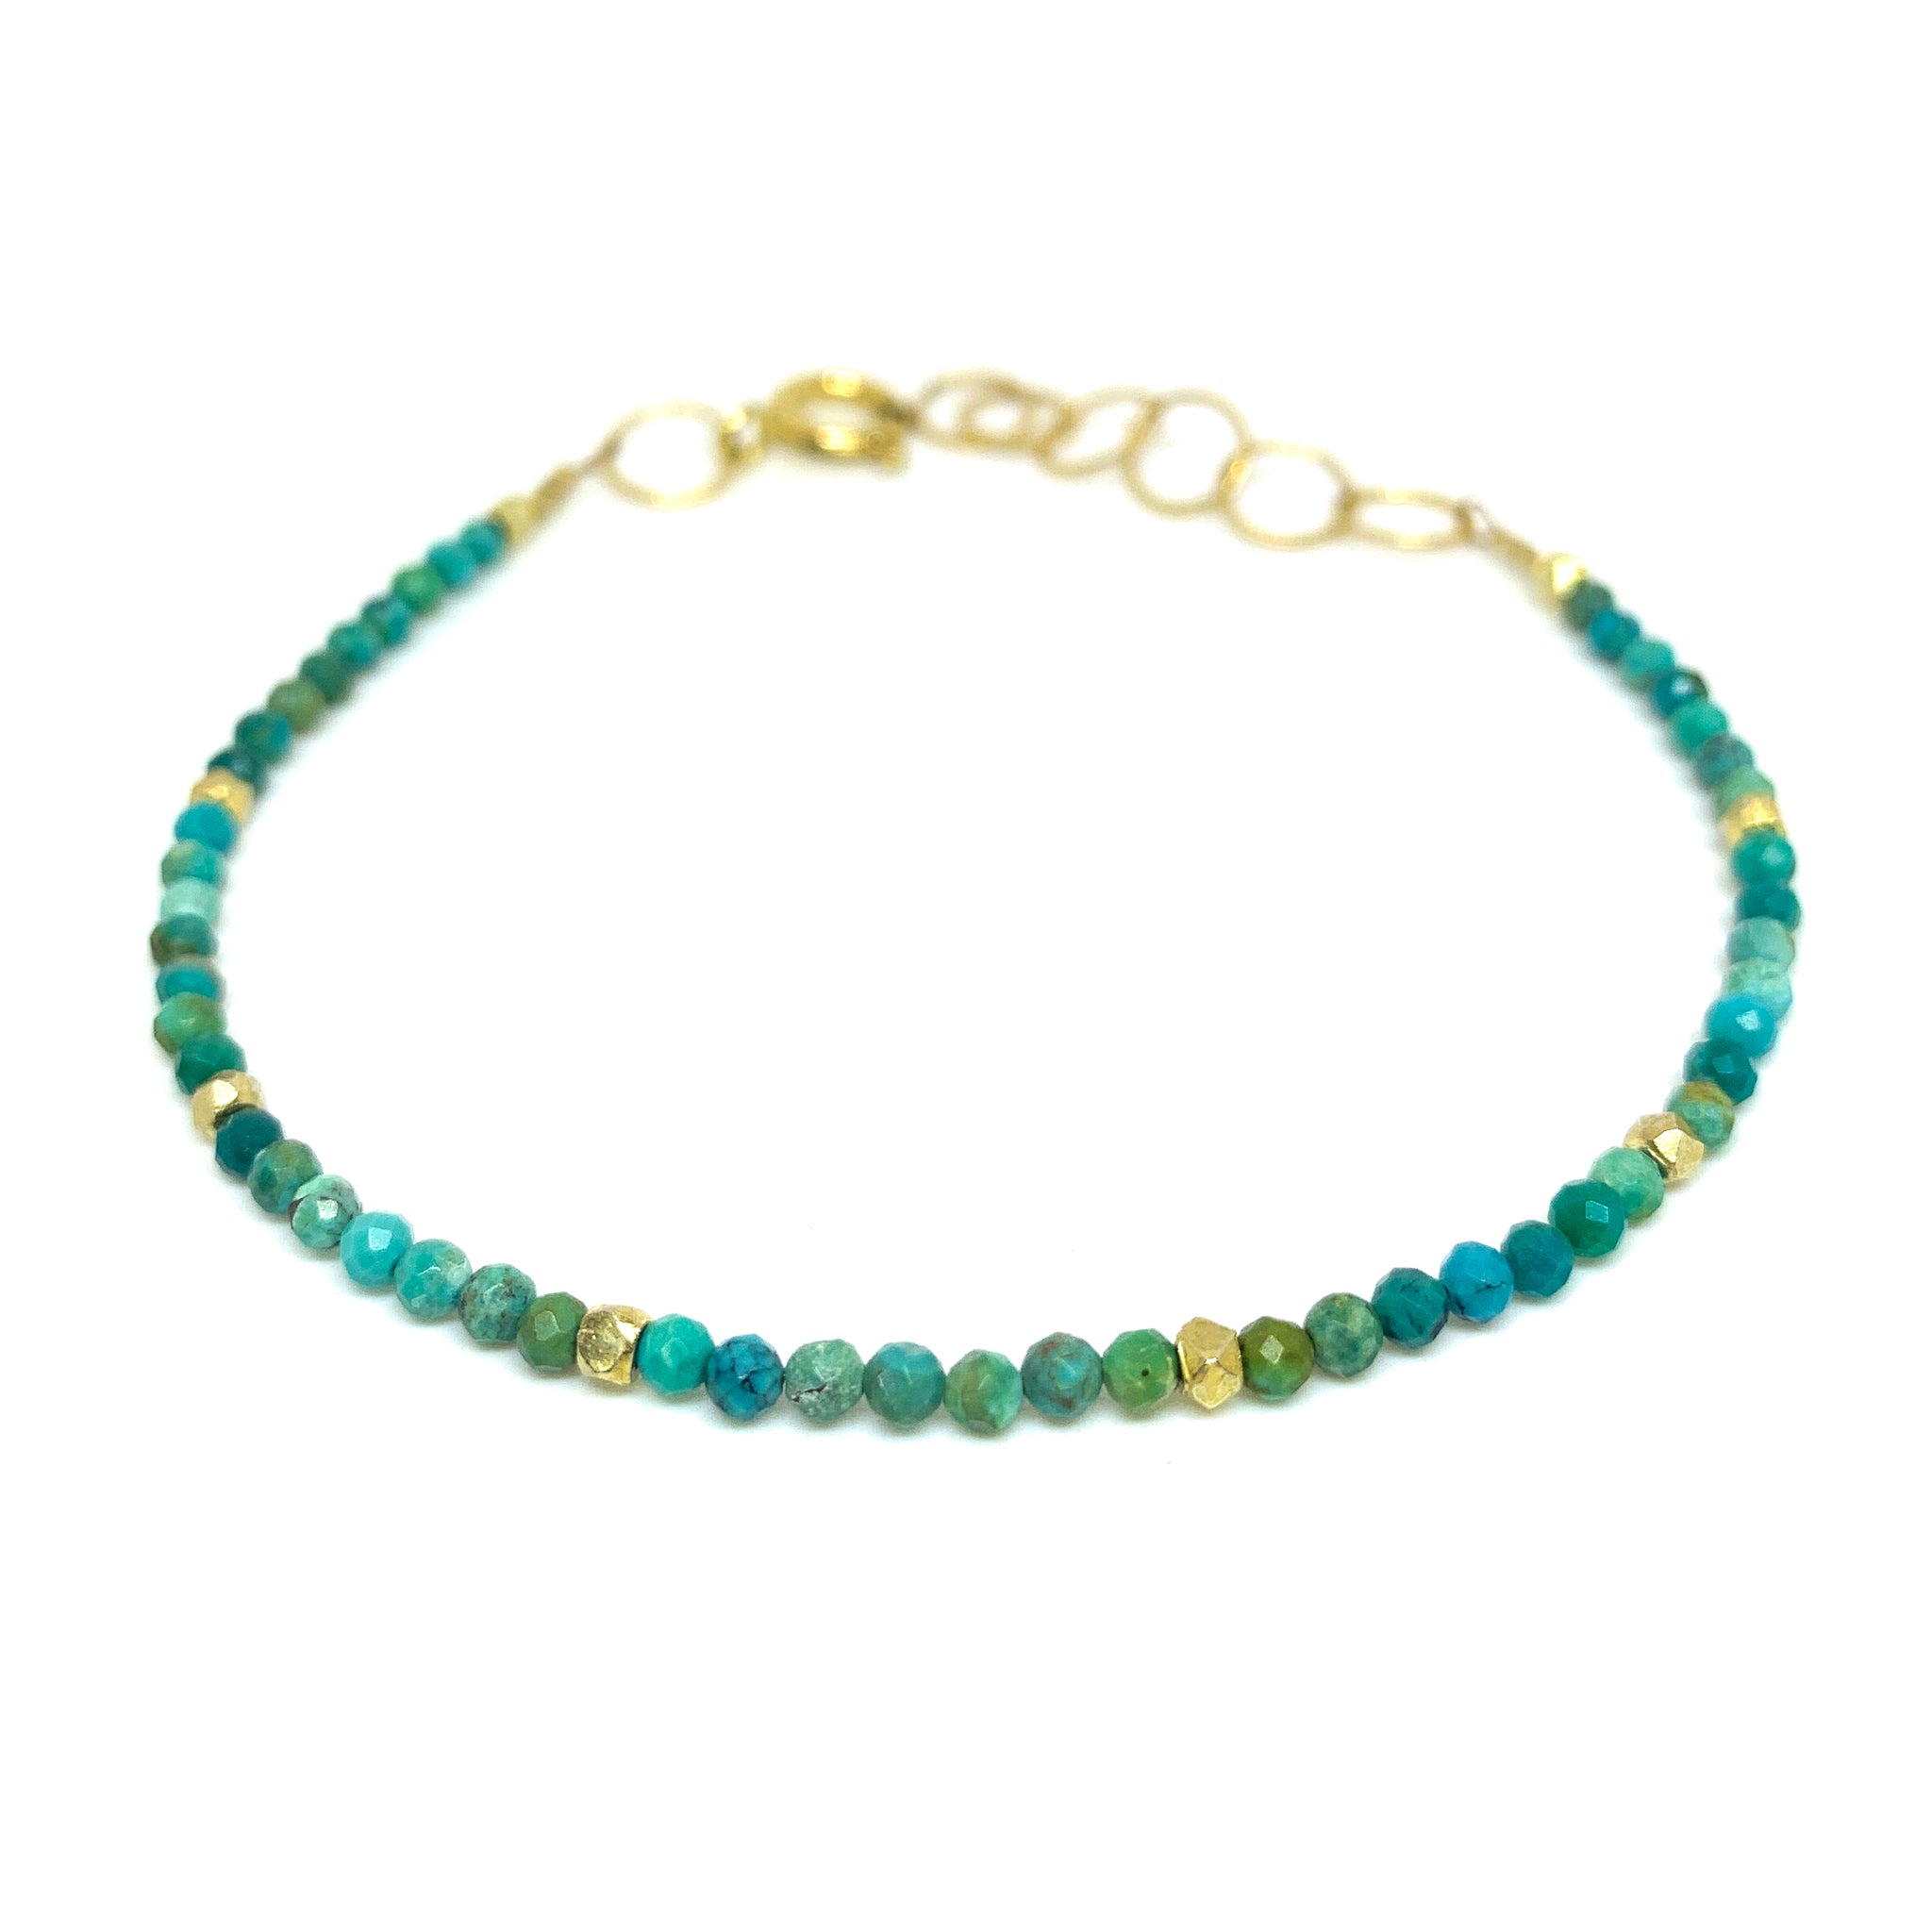 faceted turquoise bracelet with 22 karat vermeil nuggets by eve black jewelry , handmade in Hawaii